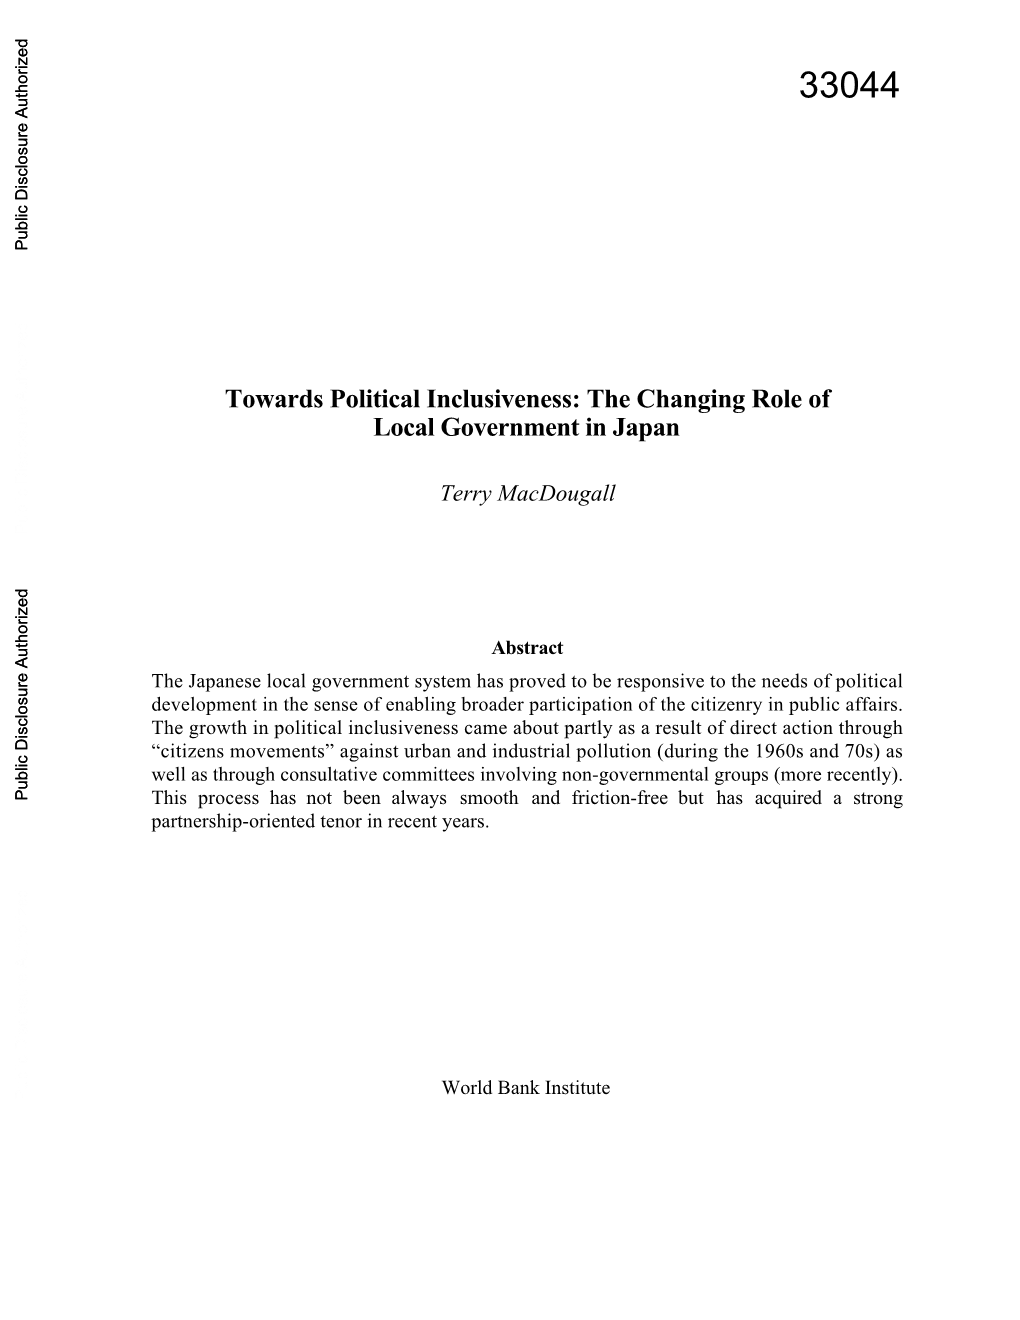 Towards Political Inclusiveness: the Changing Role of Local Government in Japan